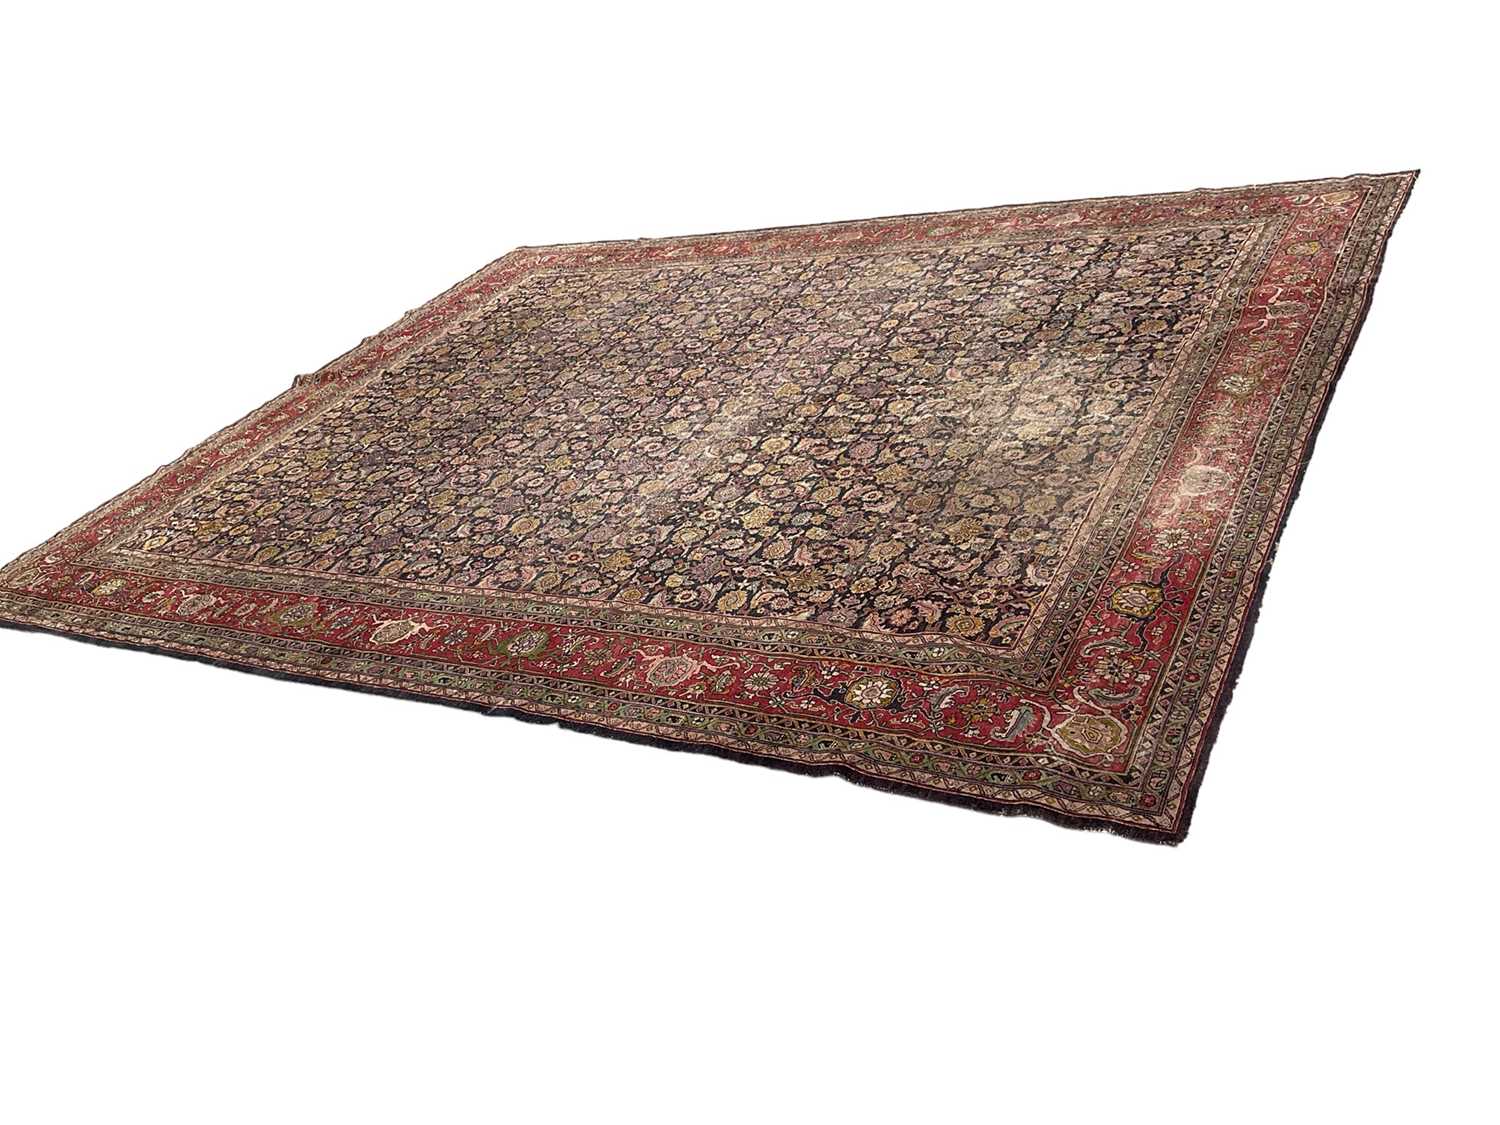 Good early Persian Bijar carpet, with allover floral knotwork on midnight blue ground, 400 x 300cm